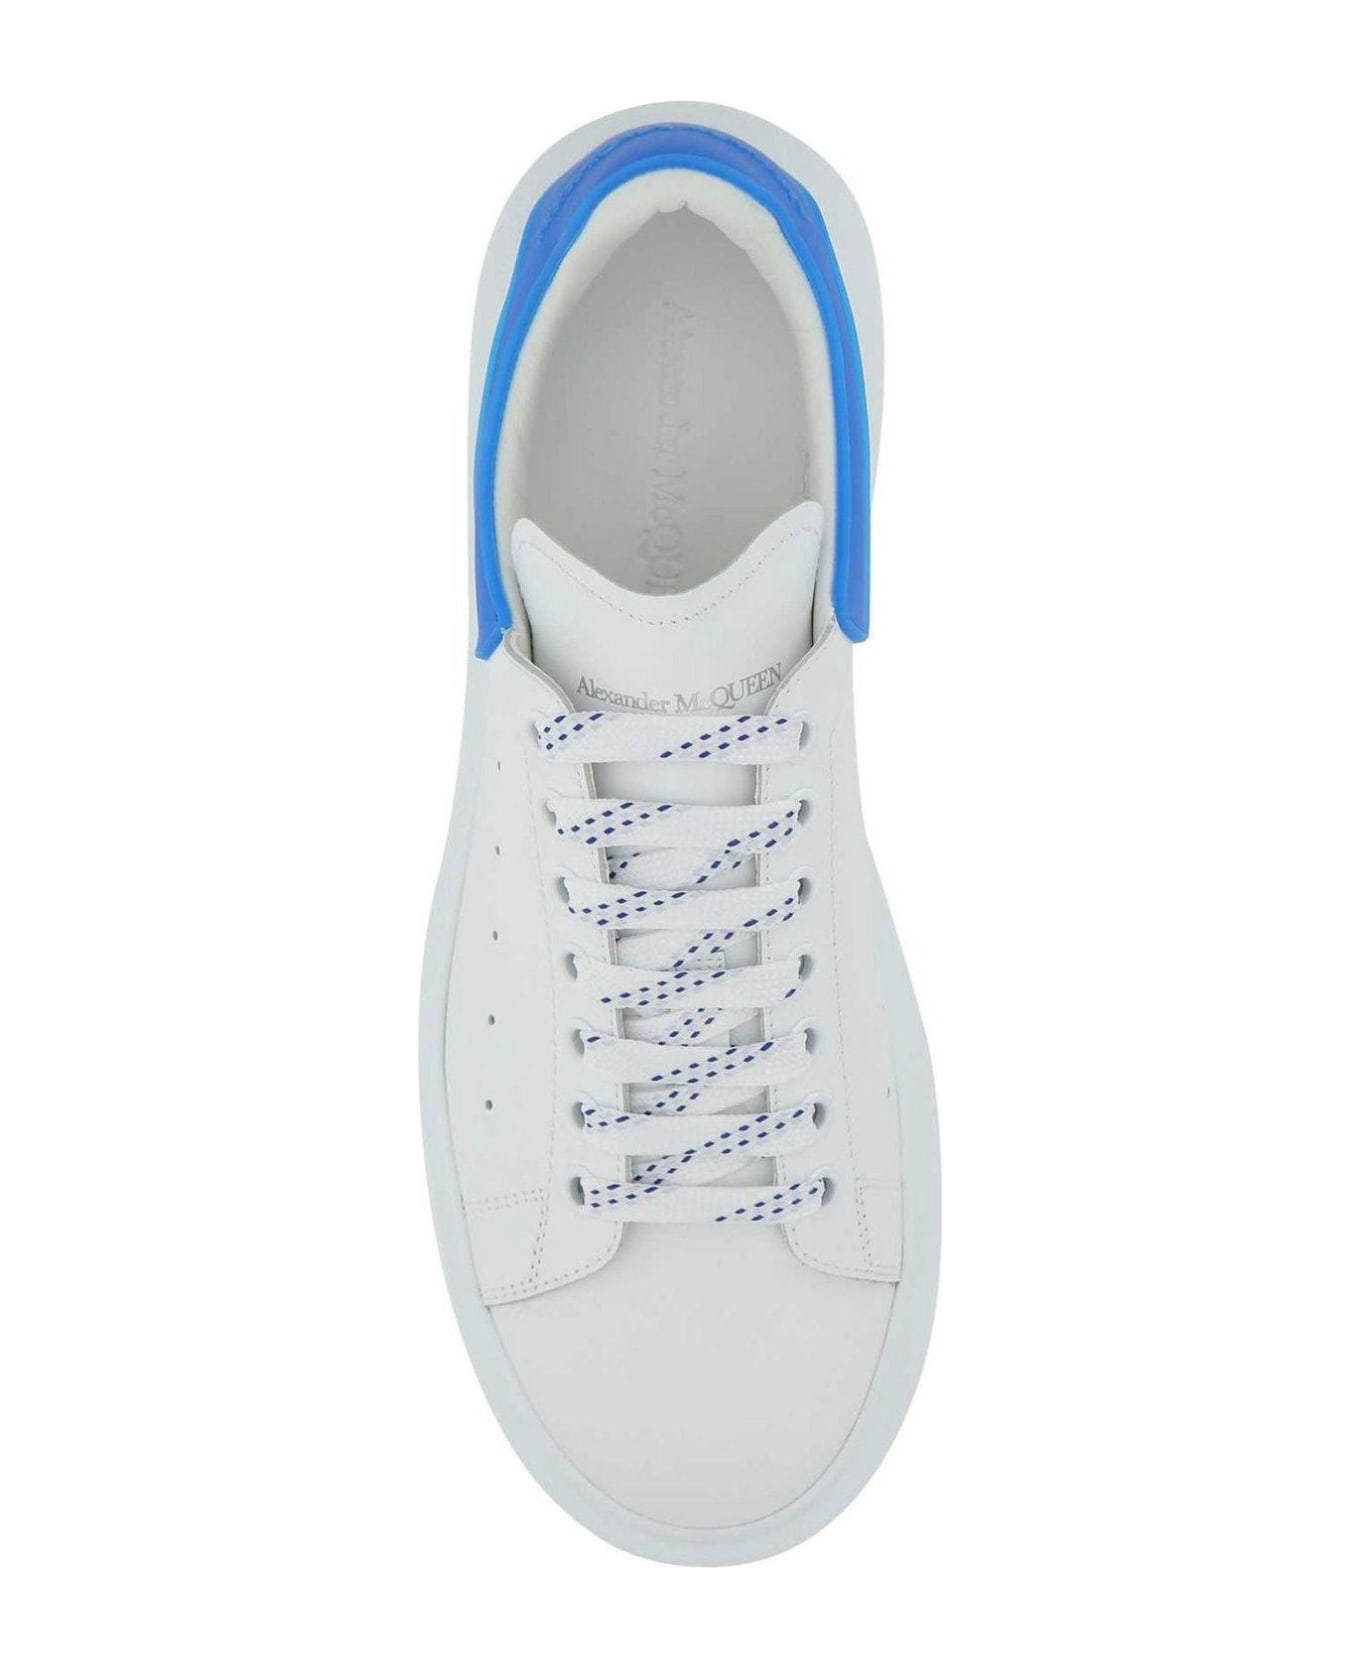 Alexander McQueen Logo Detailed Lace-up Sneakers - White/blue